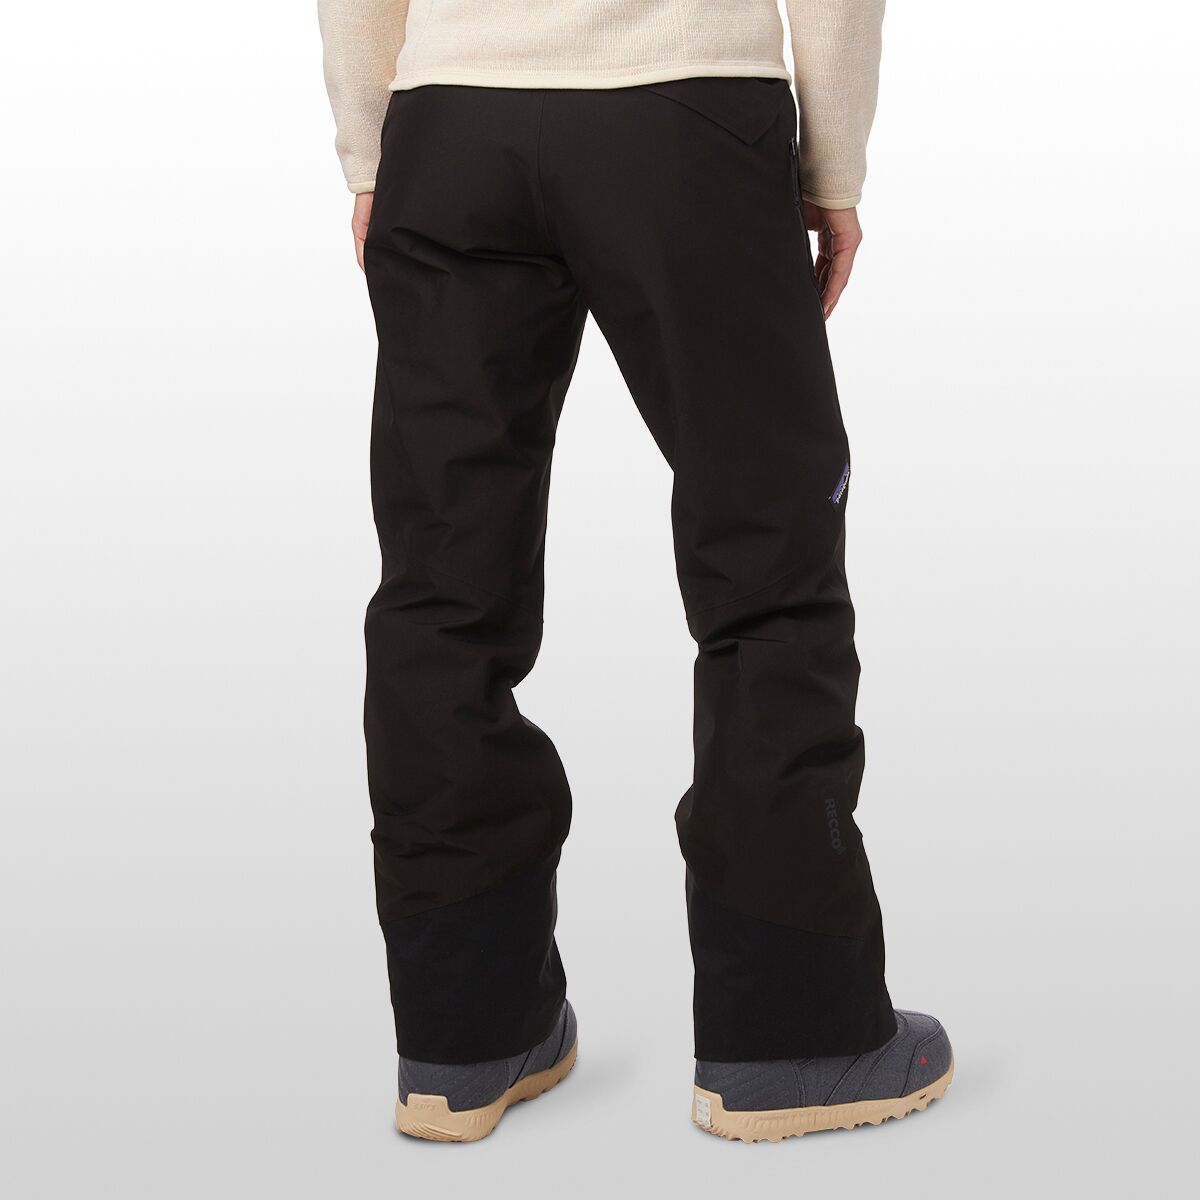 Patagonia Insulated Powder Bowl Pant - Women's | Backcountry.com